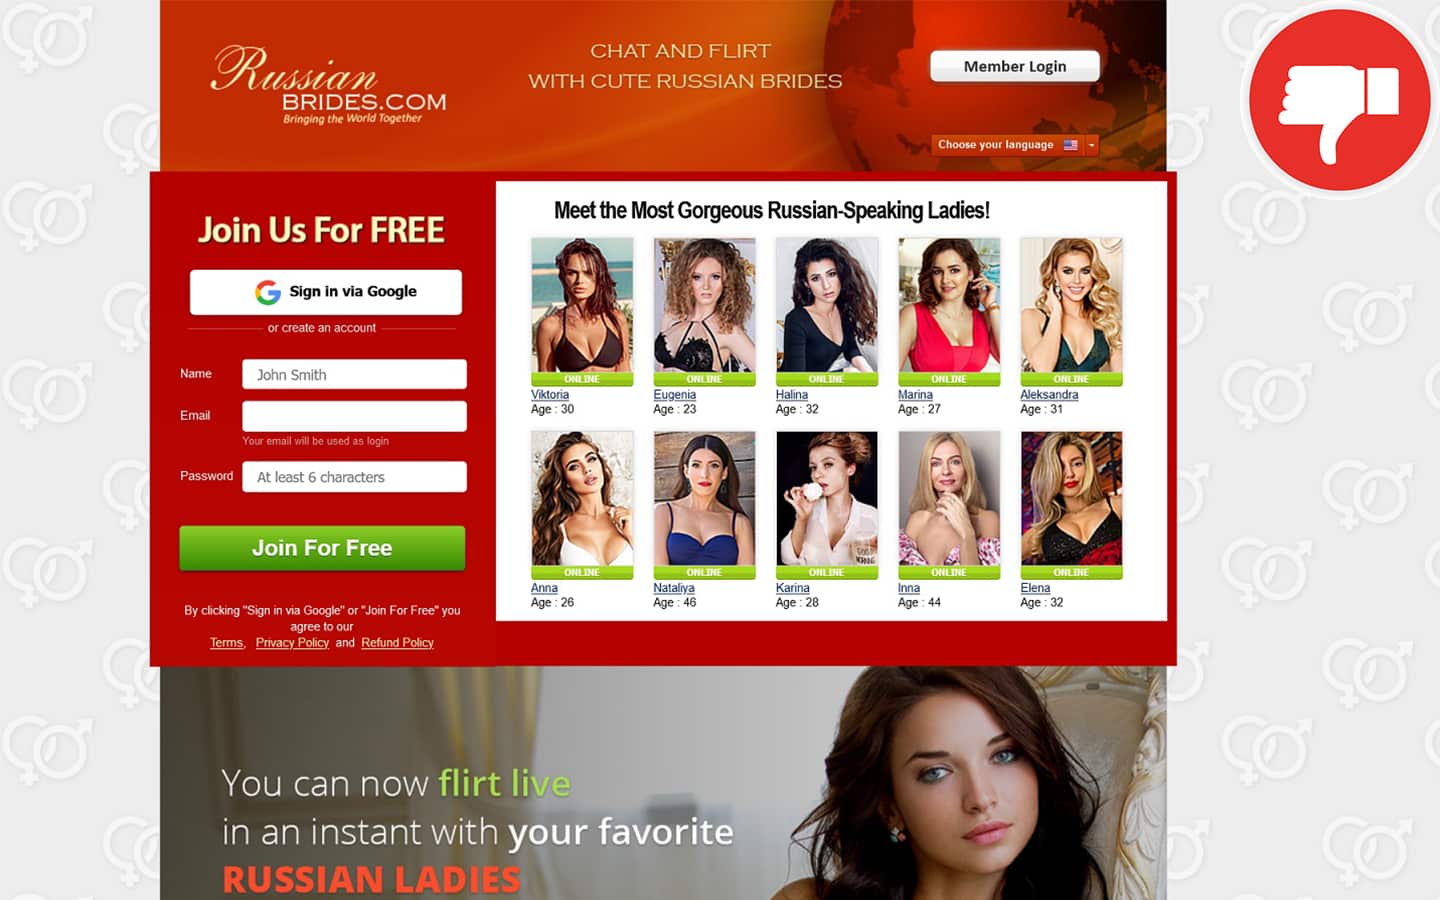 Review RussianBrides.com scam experience